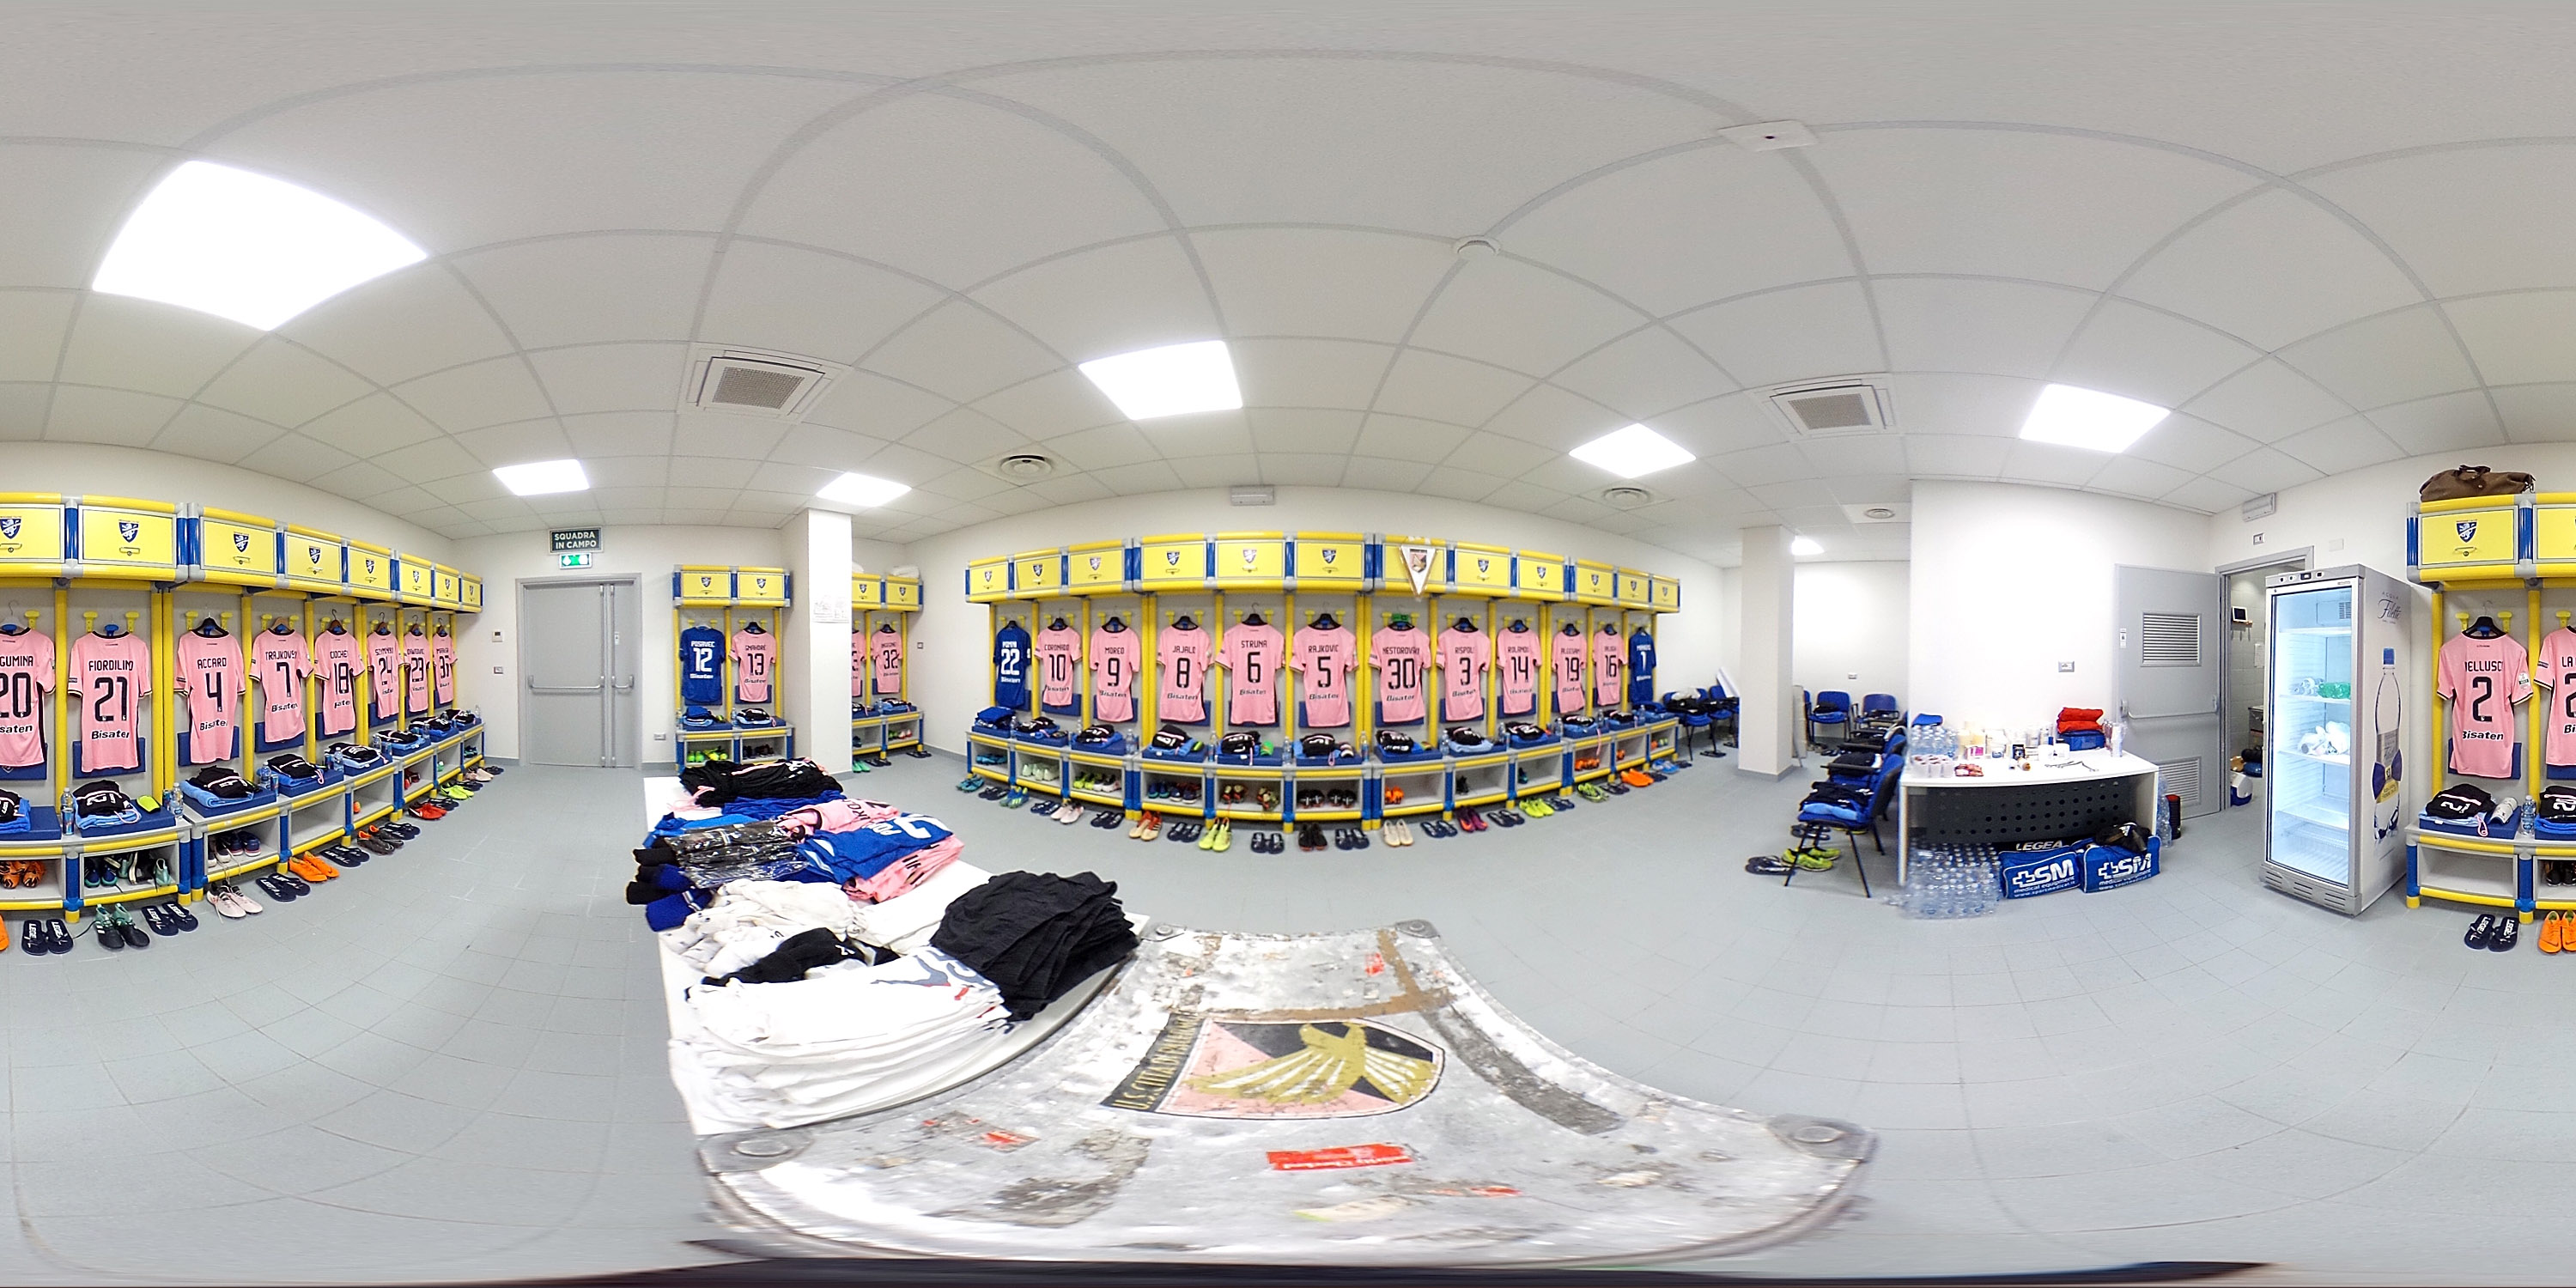 FROSINONE, ITALY - JUNE 16: (EDITOR'S NOTE: Image was created as an Equirectangular Panorama. Import image into a panoramic player to create an interactive 360 degree view) A general view of Palermo dressing room before the serie B playoff match final between Frosinone Calcio v US Citta di Palermo at Stadio Benito Stirpe on June 16, 2018 in Frosinone, Italy.  (Photo by Tullio M. Puglia/Getty Images)